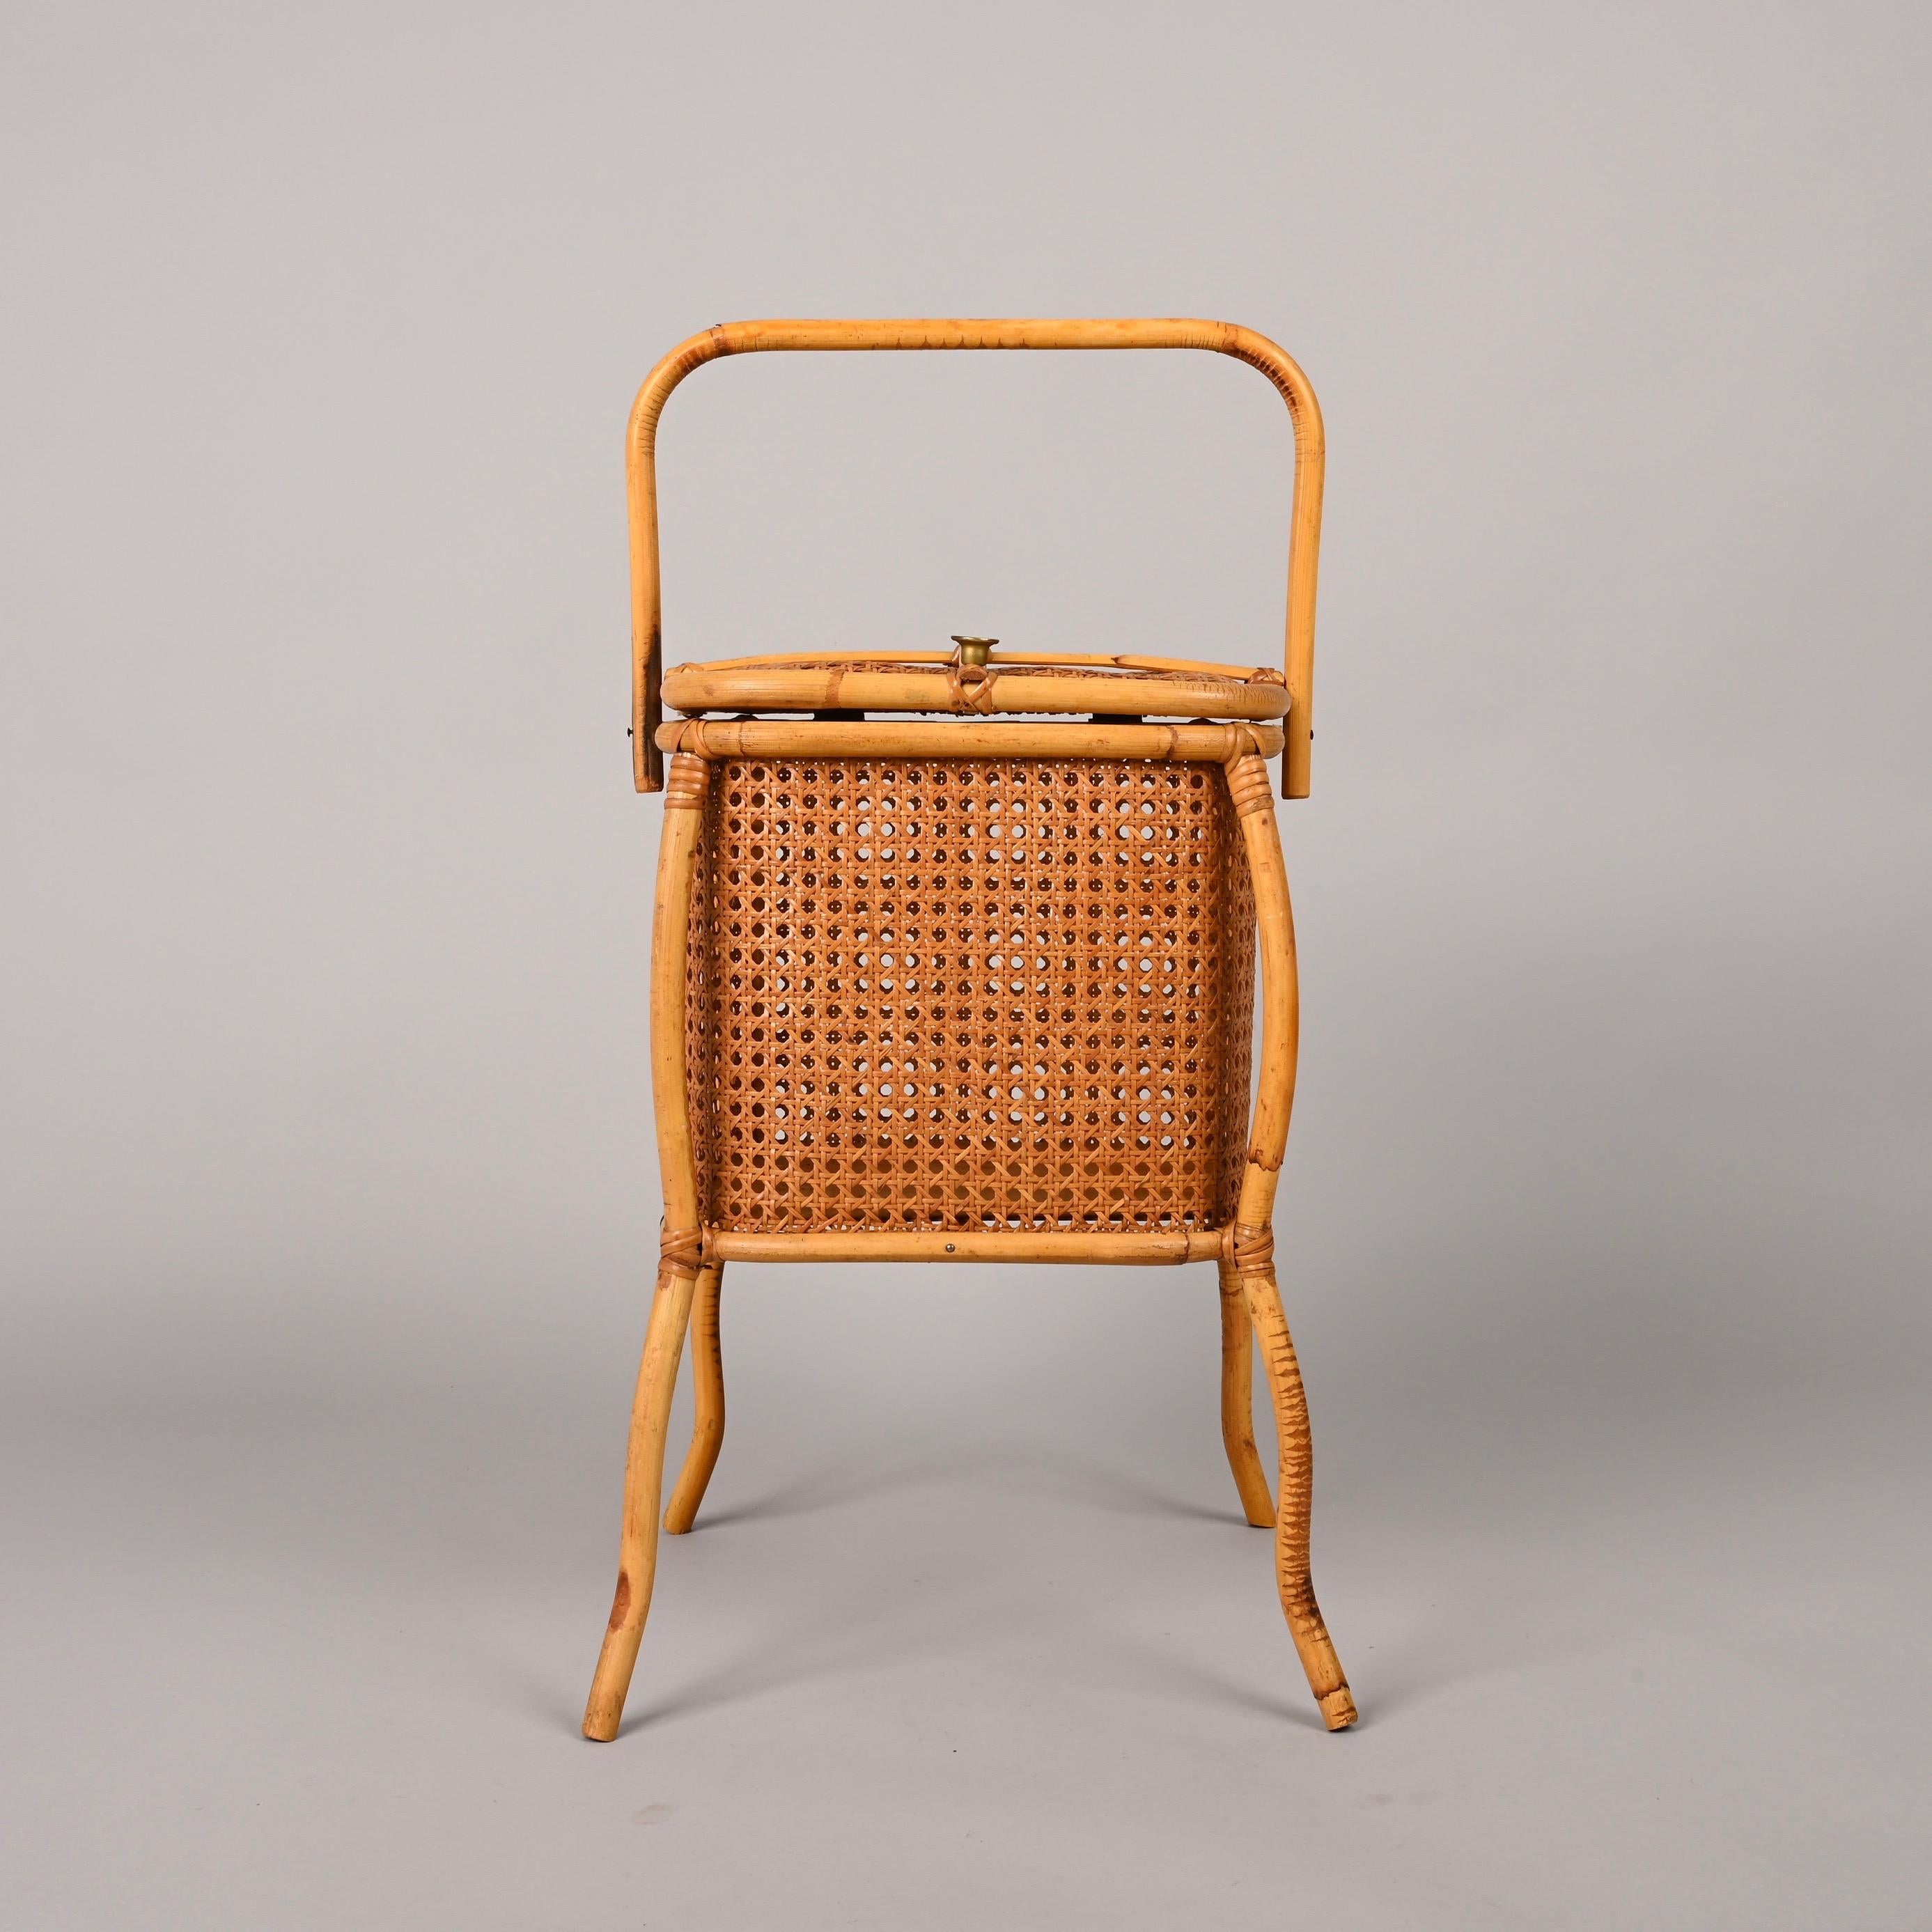 Midcentury Bamboo, Wicker and Vienna Straw Cubic Italian Magazine Basket, 1960s For Sale 1